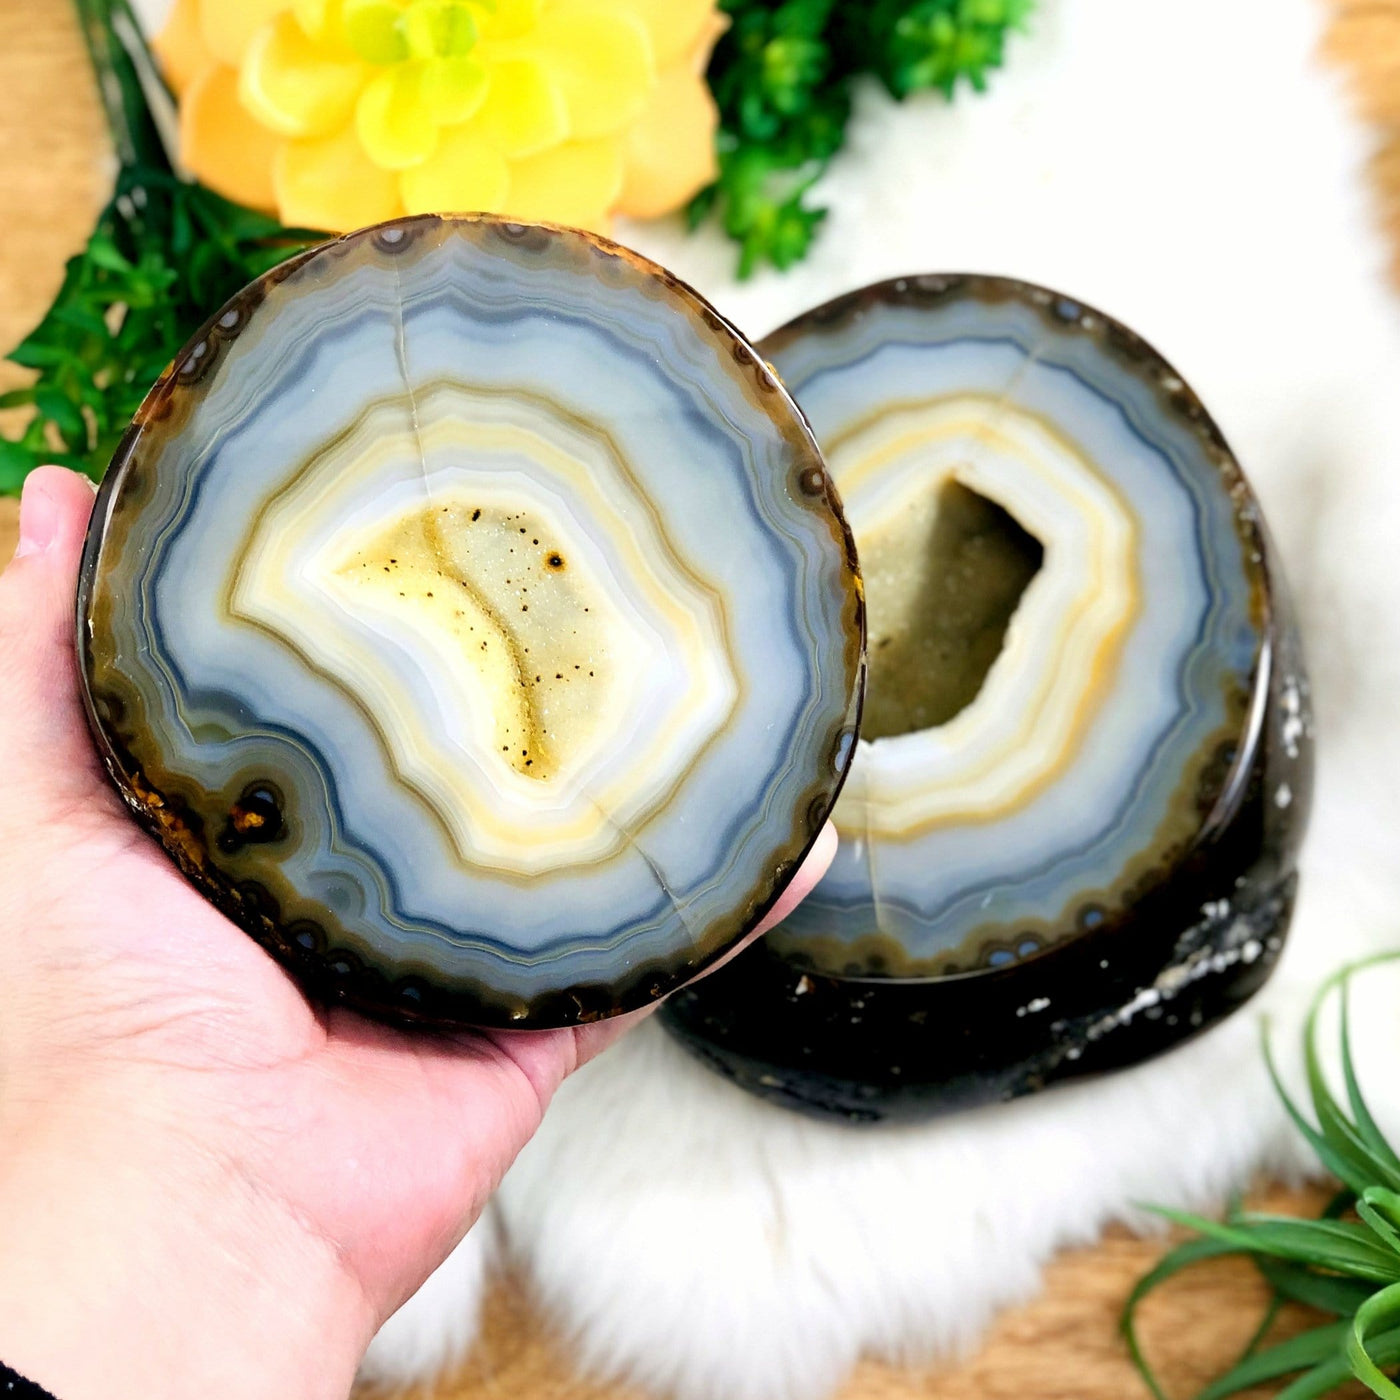 Agate geode box open displaying the pattern and druzy, one half of the geode is in a hand. Plants in the background.